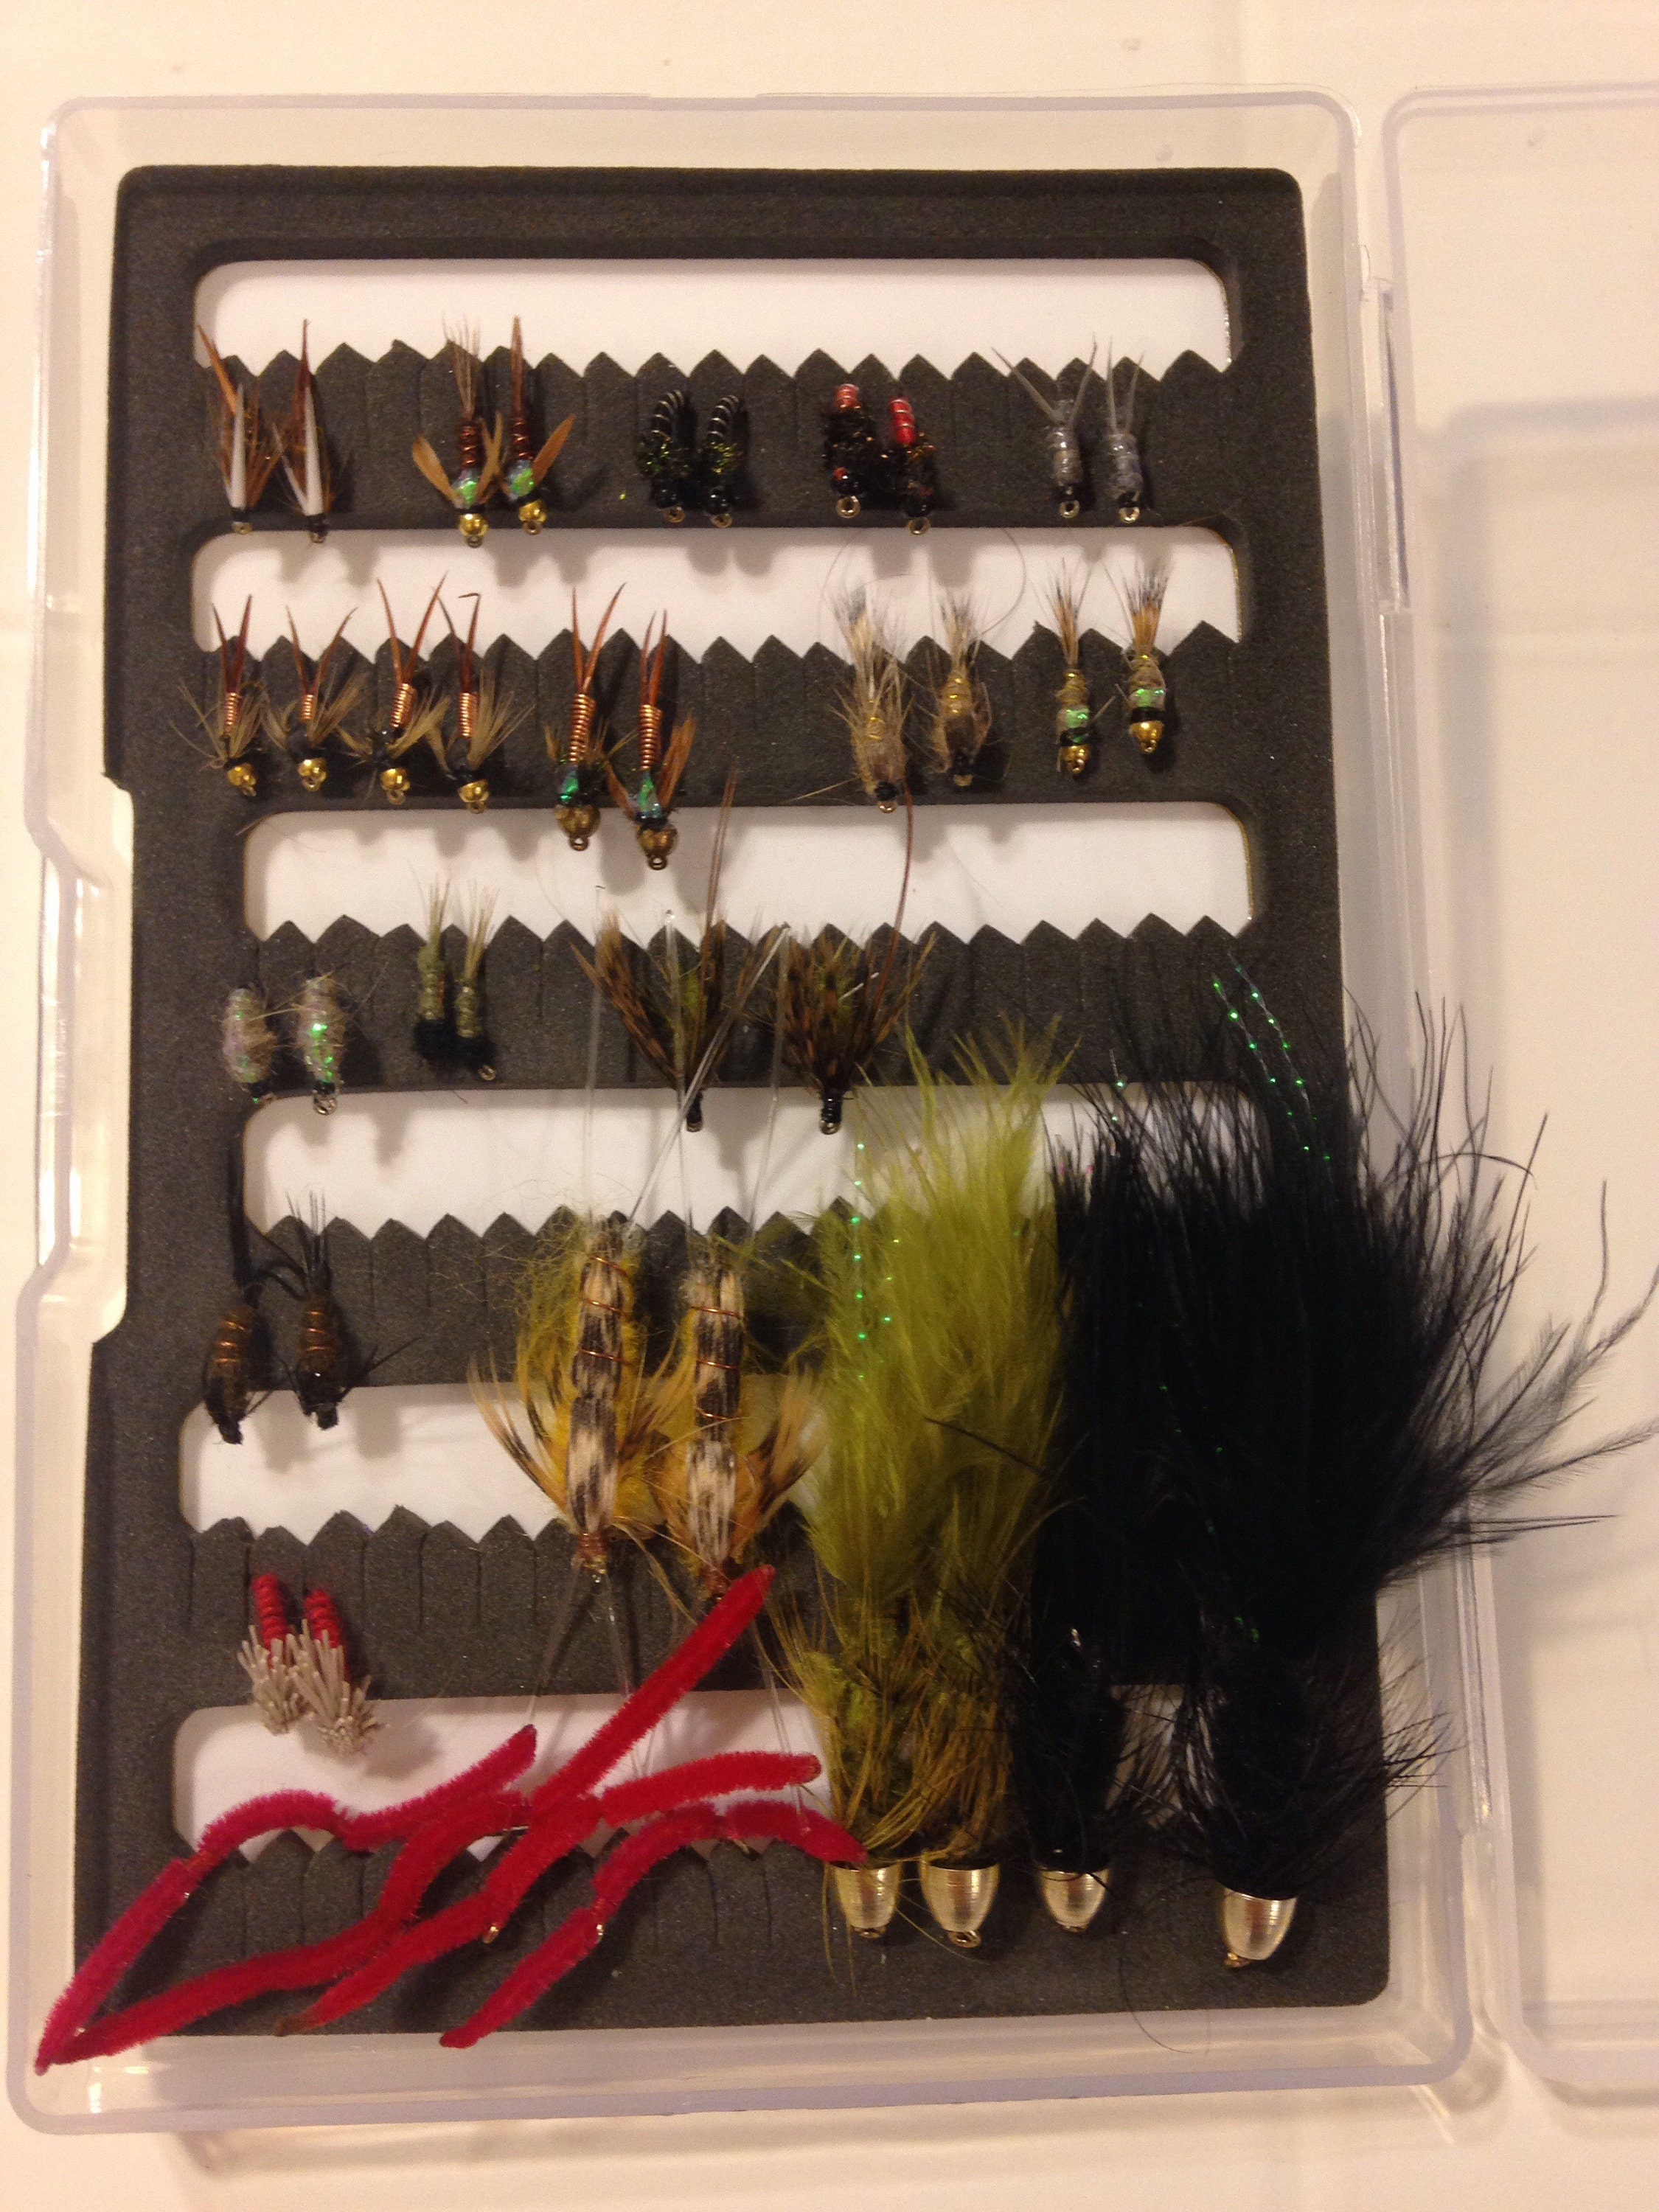 Trout Tackle Box 